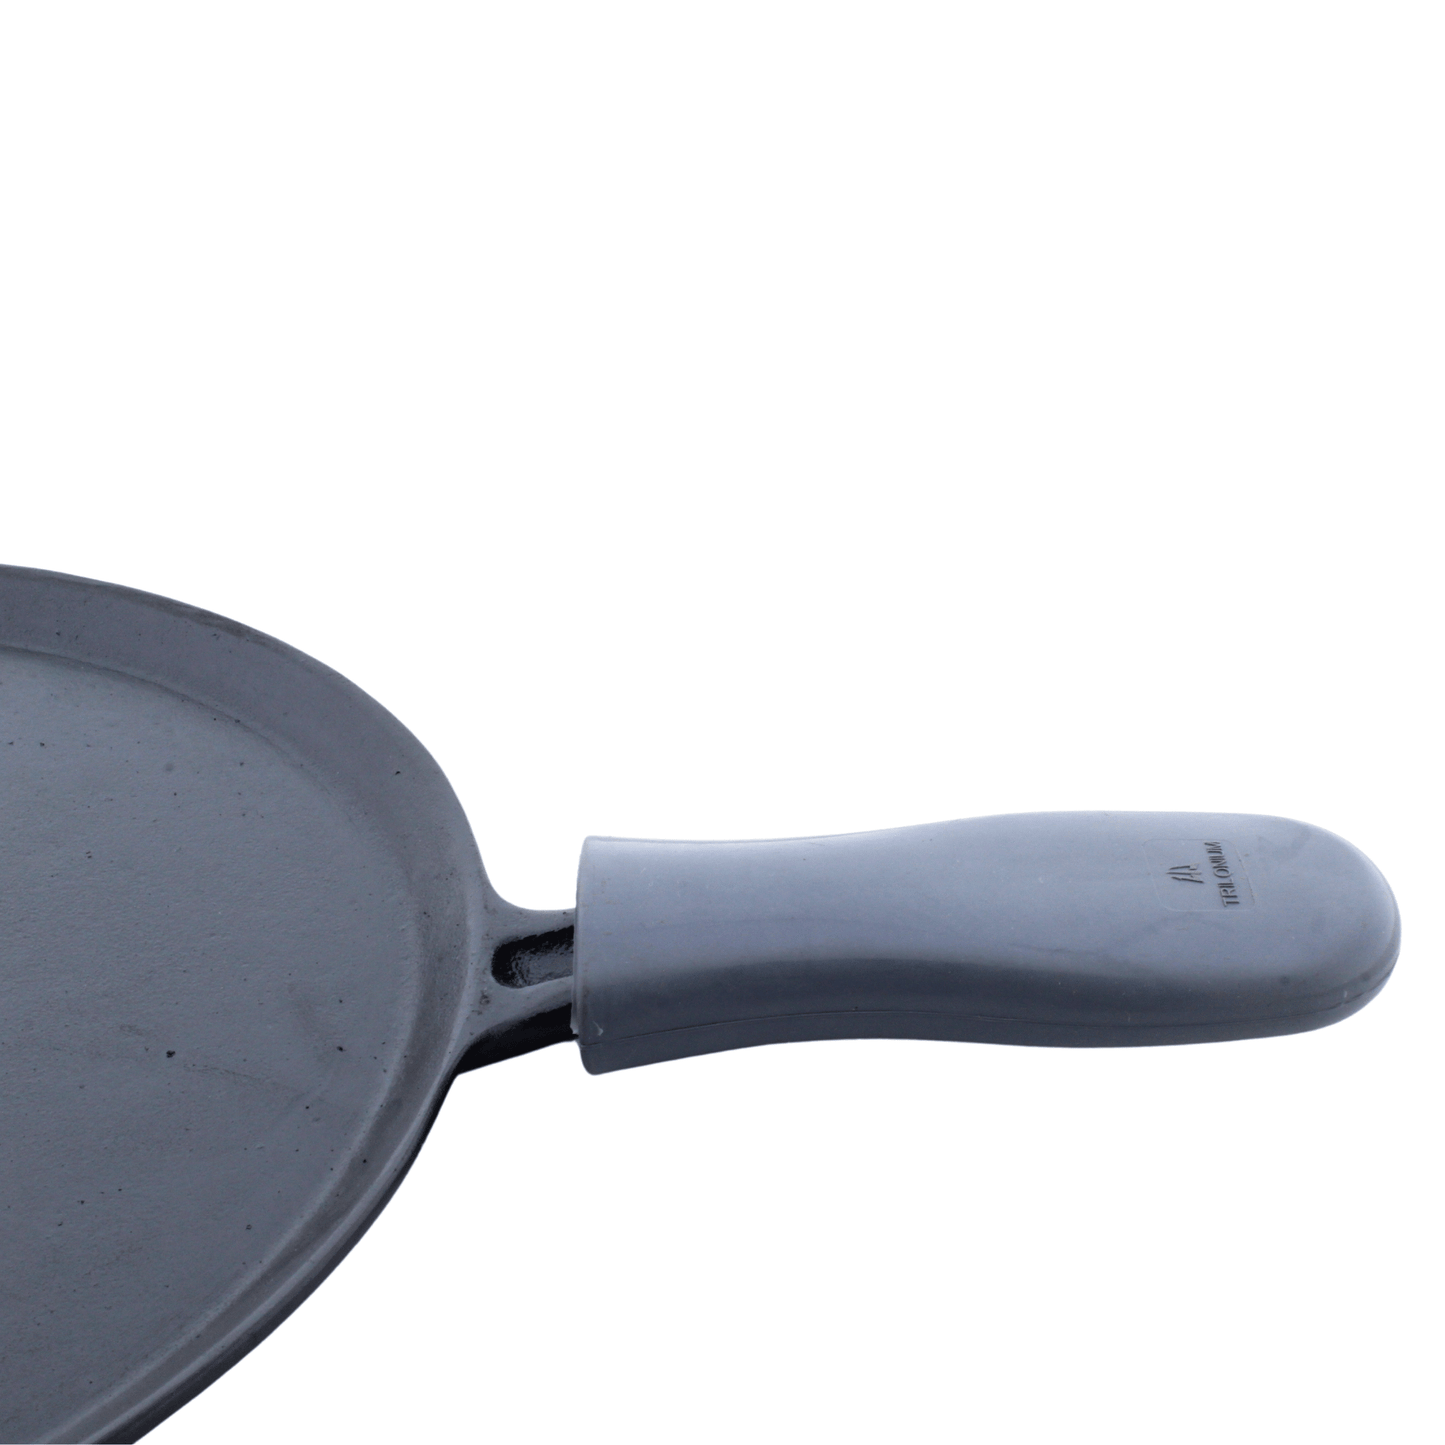 Silicone Heat proof Skillet sleeve grip for hot handles of cast iron skillets, tawas, grill pans, etc..